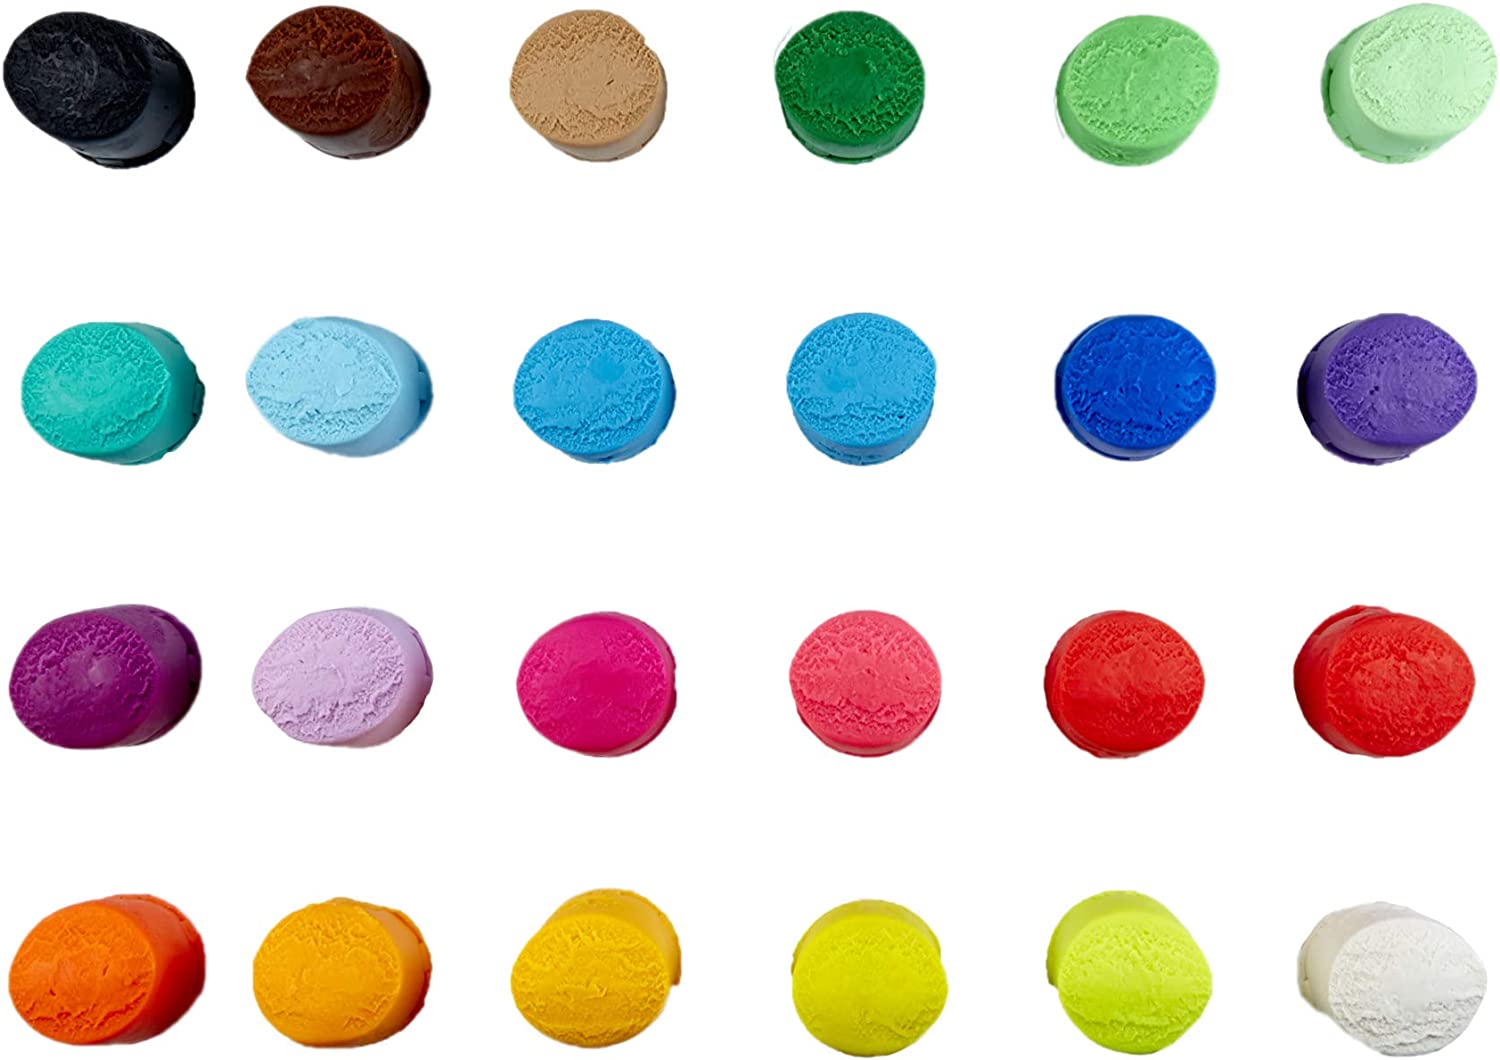 Play-Doh Bulk Multi Colors 3-Pack of Non-Toxic Modeling Compound